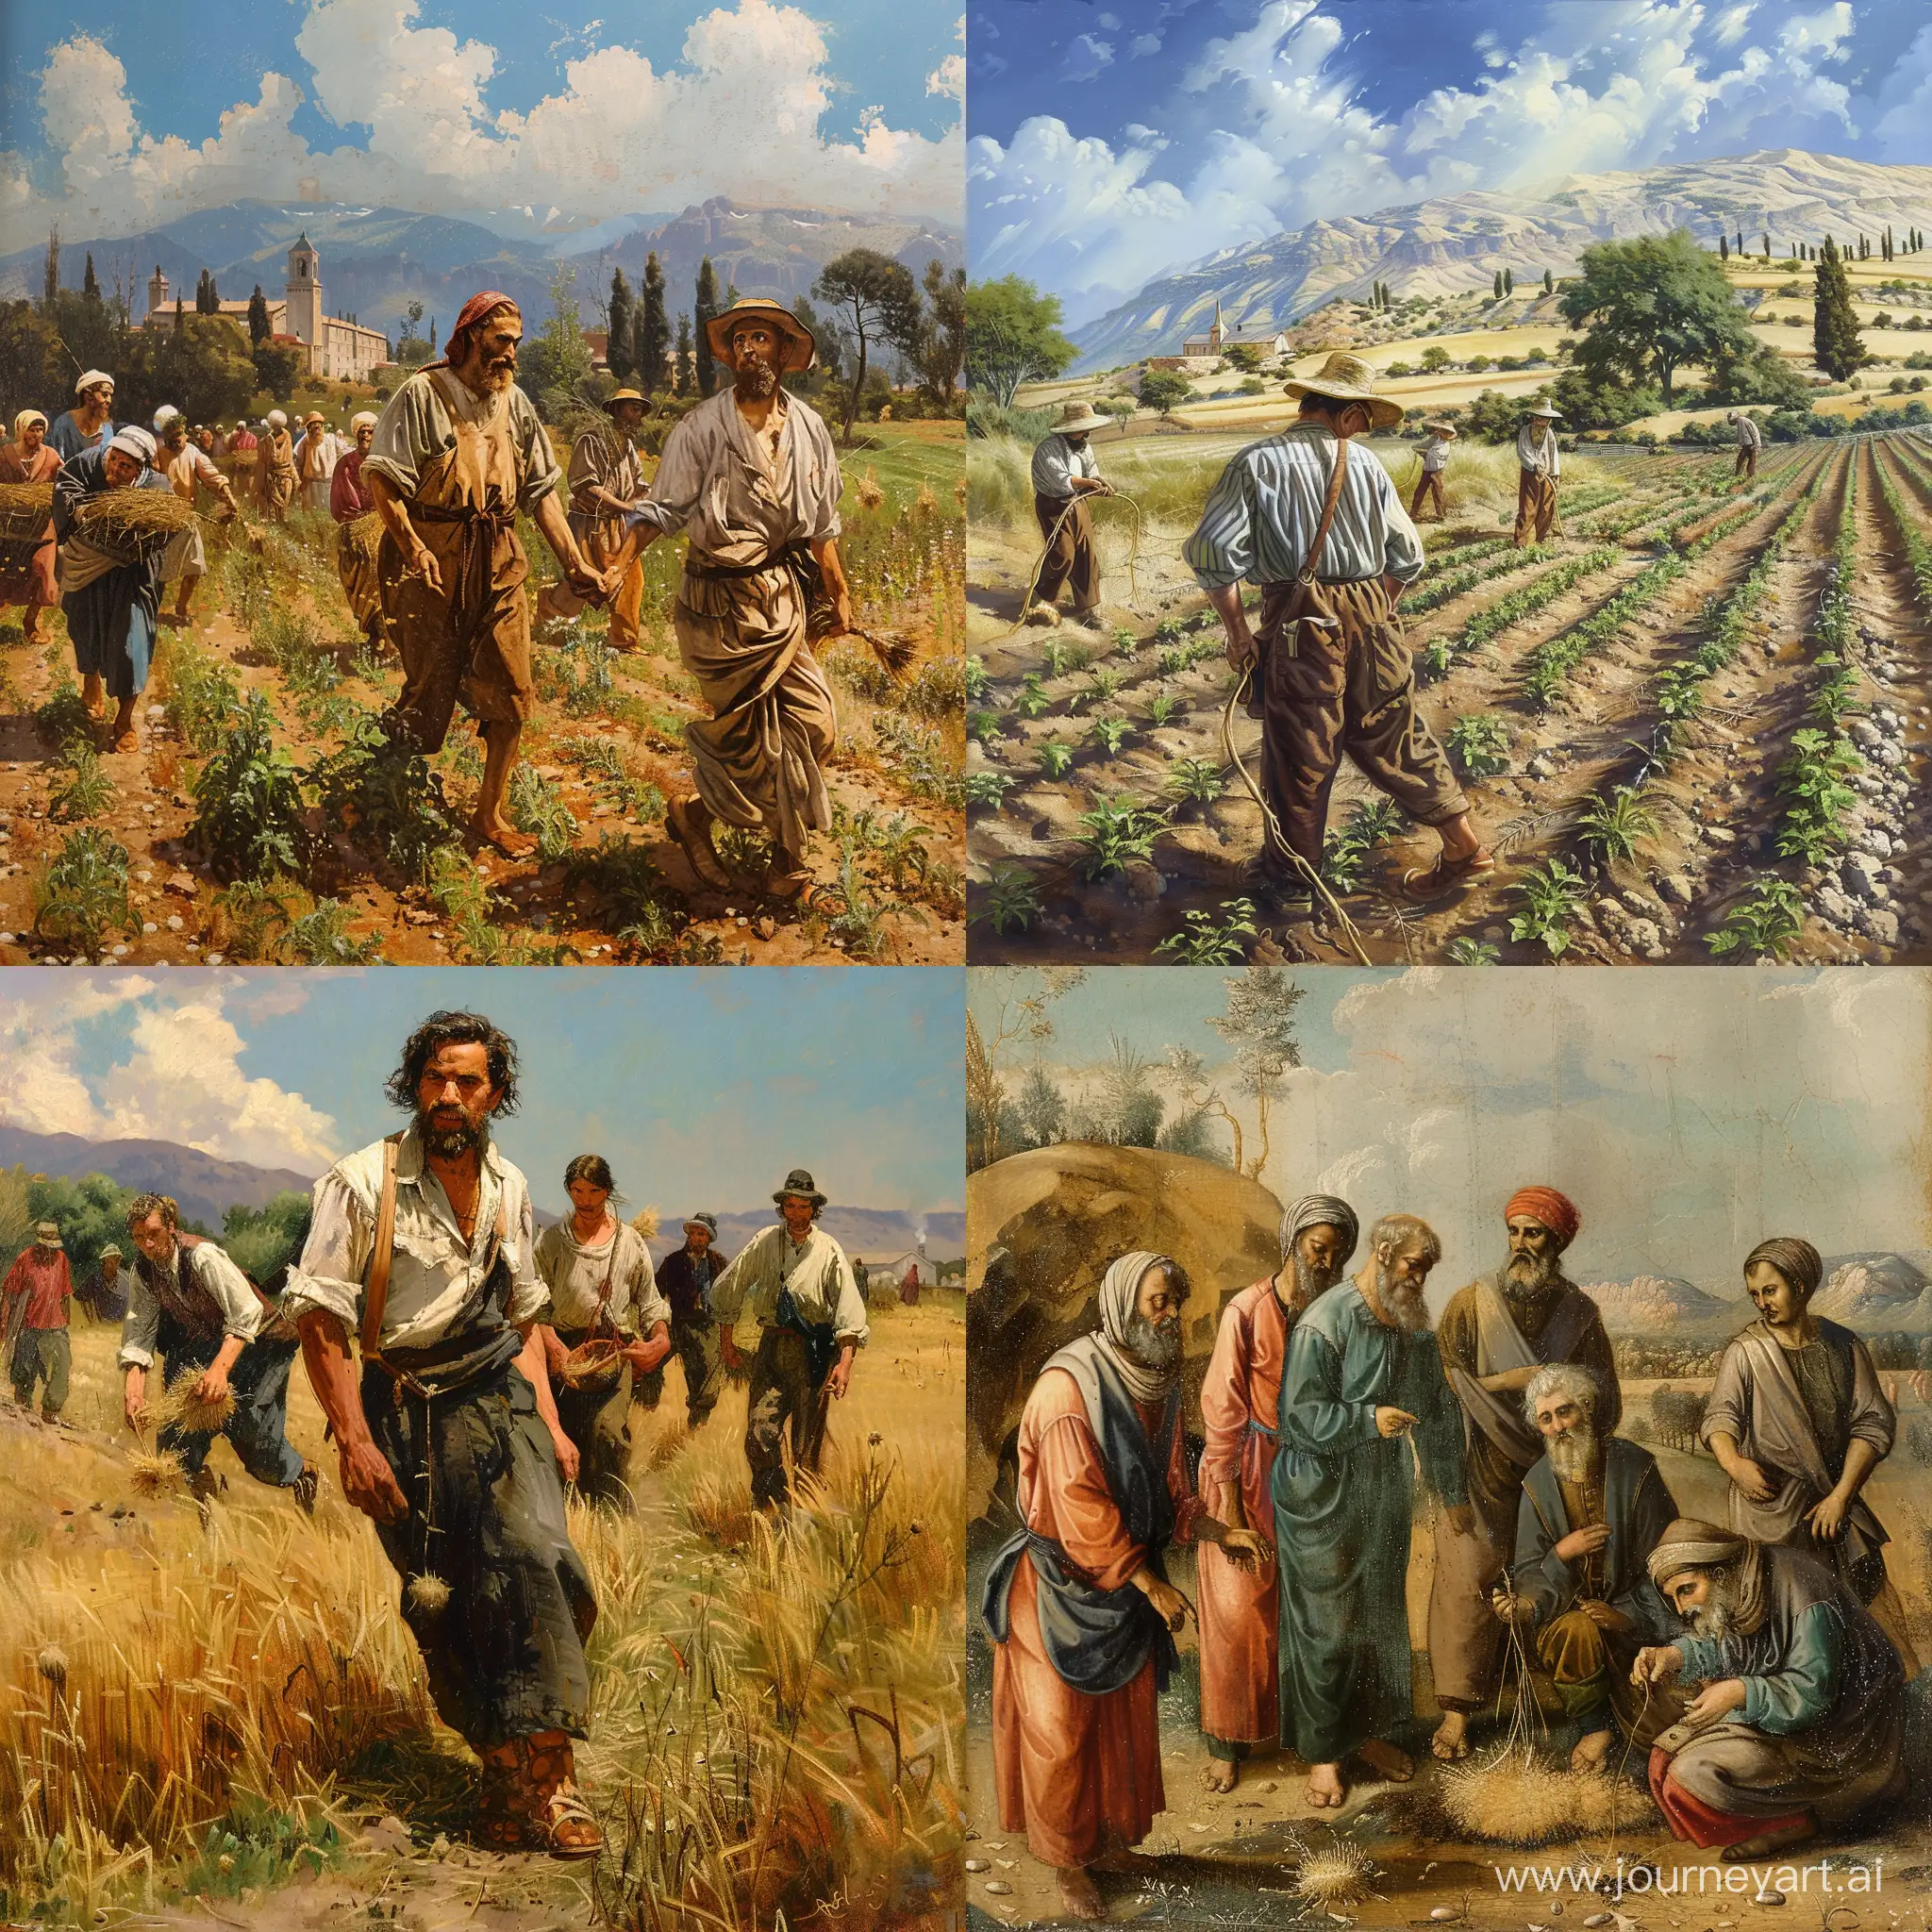 Illustration-of-Parable-of-the-Sower-Depicting-a-Farmer-Sowing-Seeds